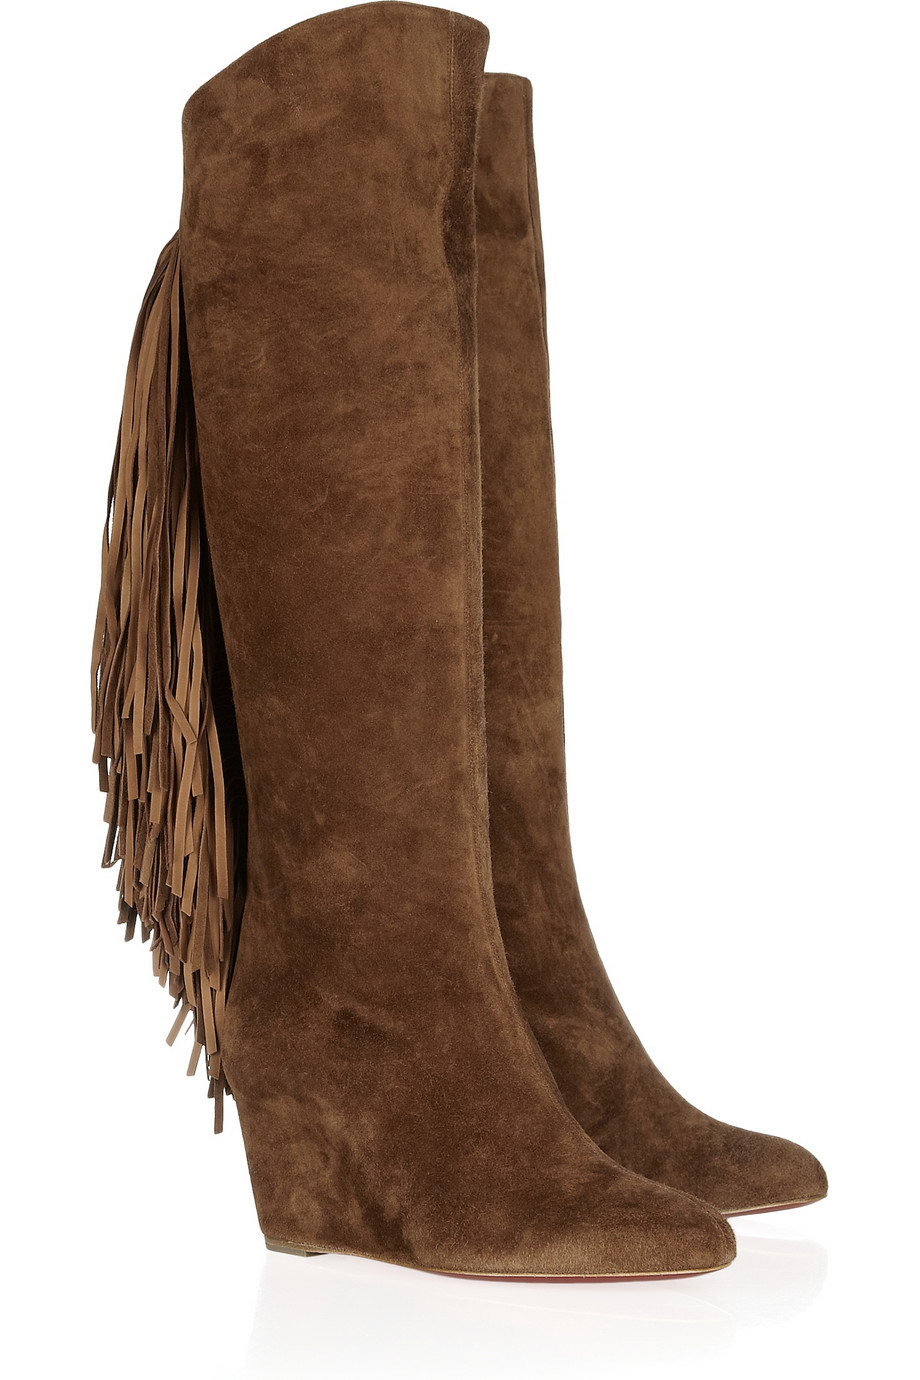 Christian louboutin Pouliche 70 Fringed Suede Boots in Brown | Lyst  